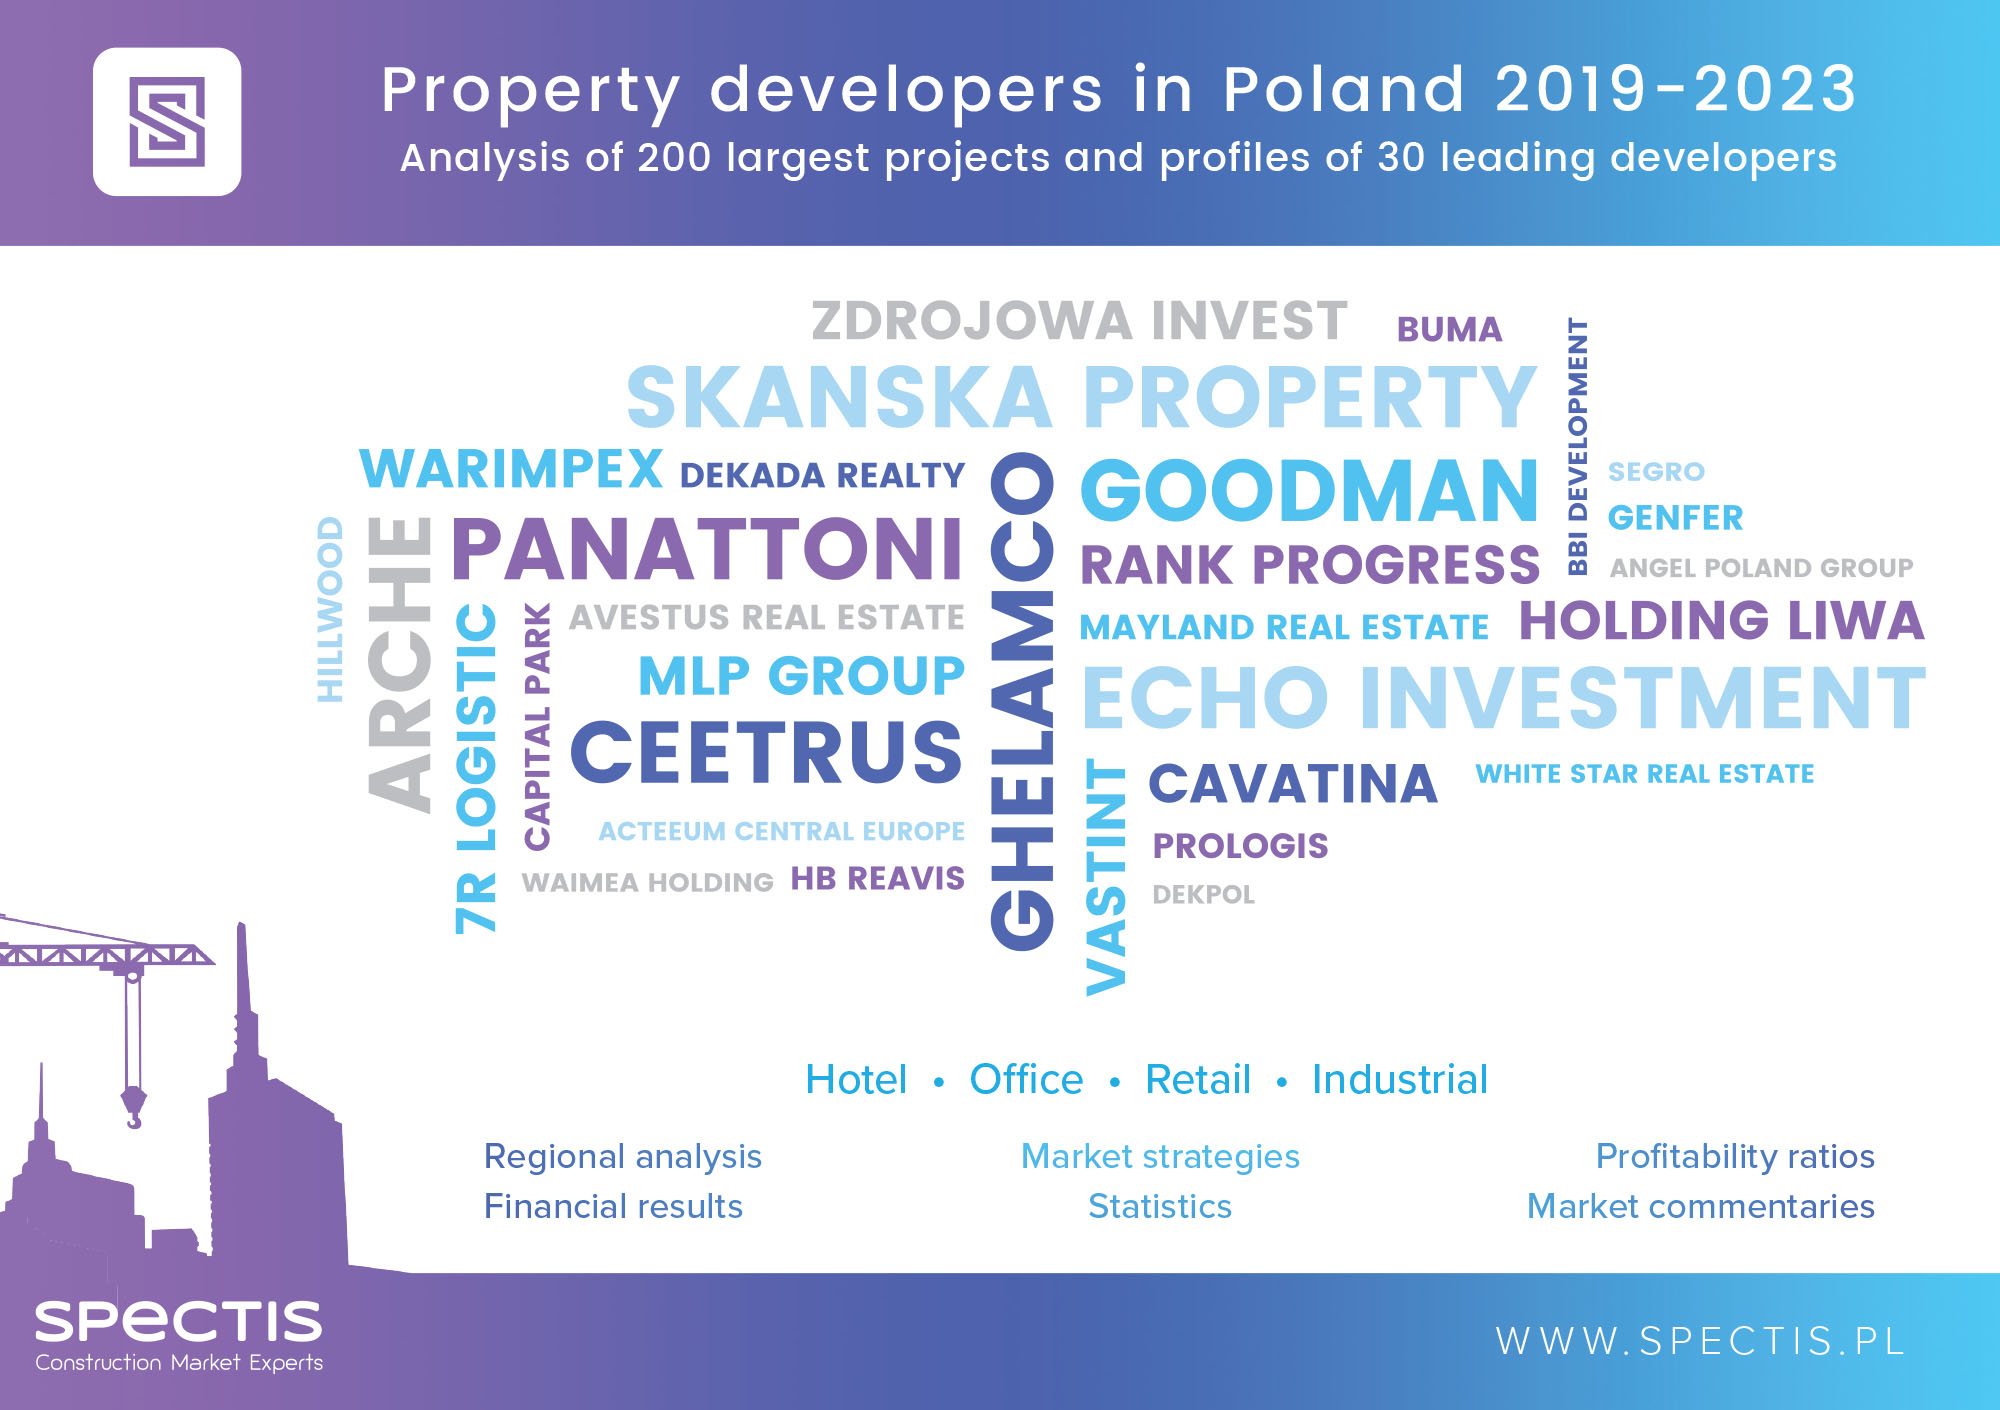 Projects of top 30 property developers in Poland worth nearly €10bn